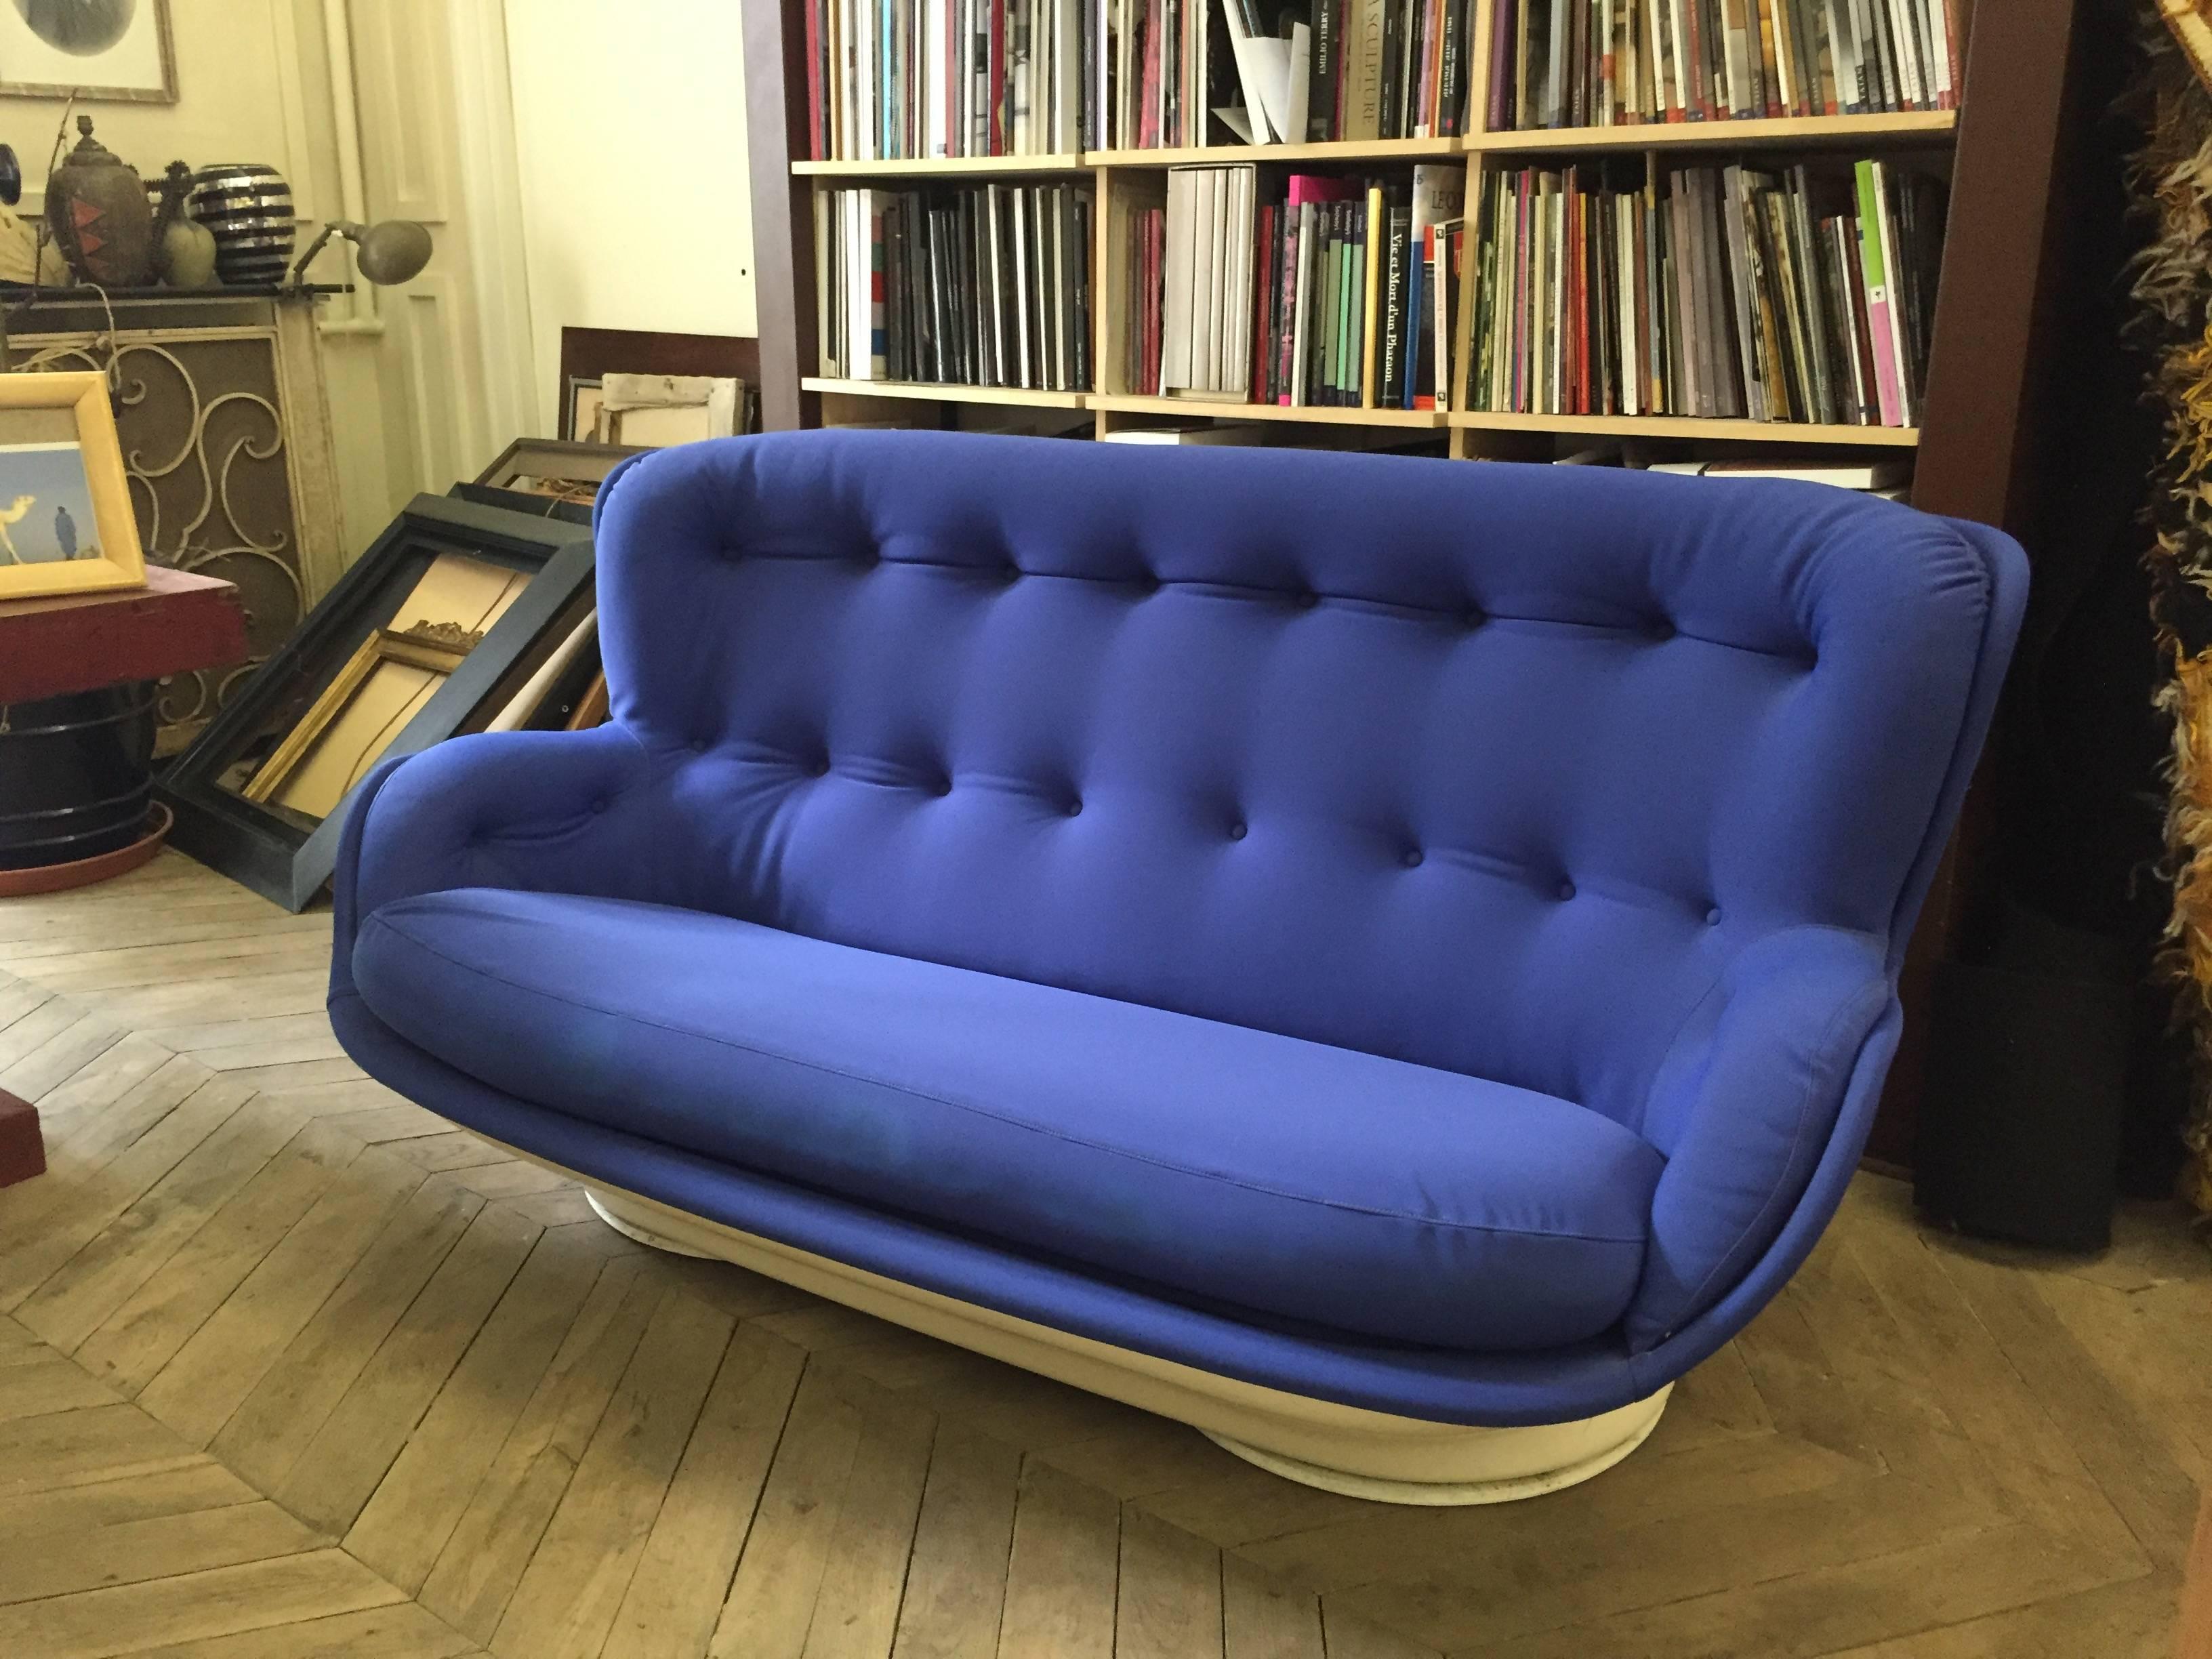 Impressive and original blue sofa. This sofa was produced in 1968 by Airborne International France, after a design by Michel Cadestin. The white Fiberglass hull is upholstered in blue fabric, and is very comfortable.